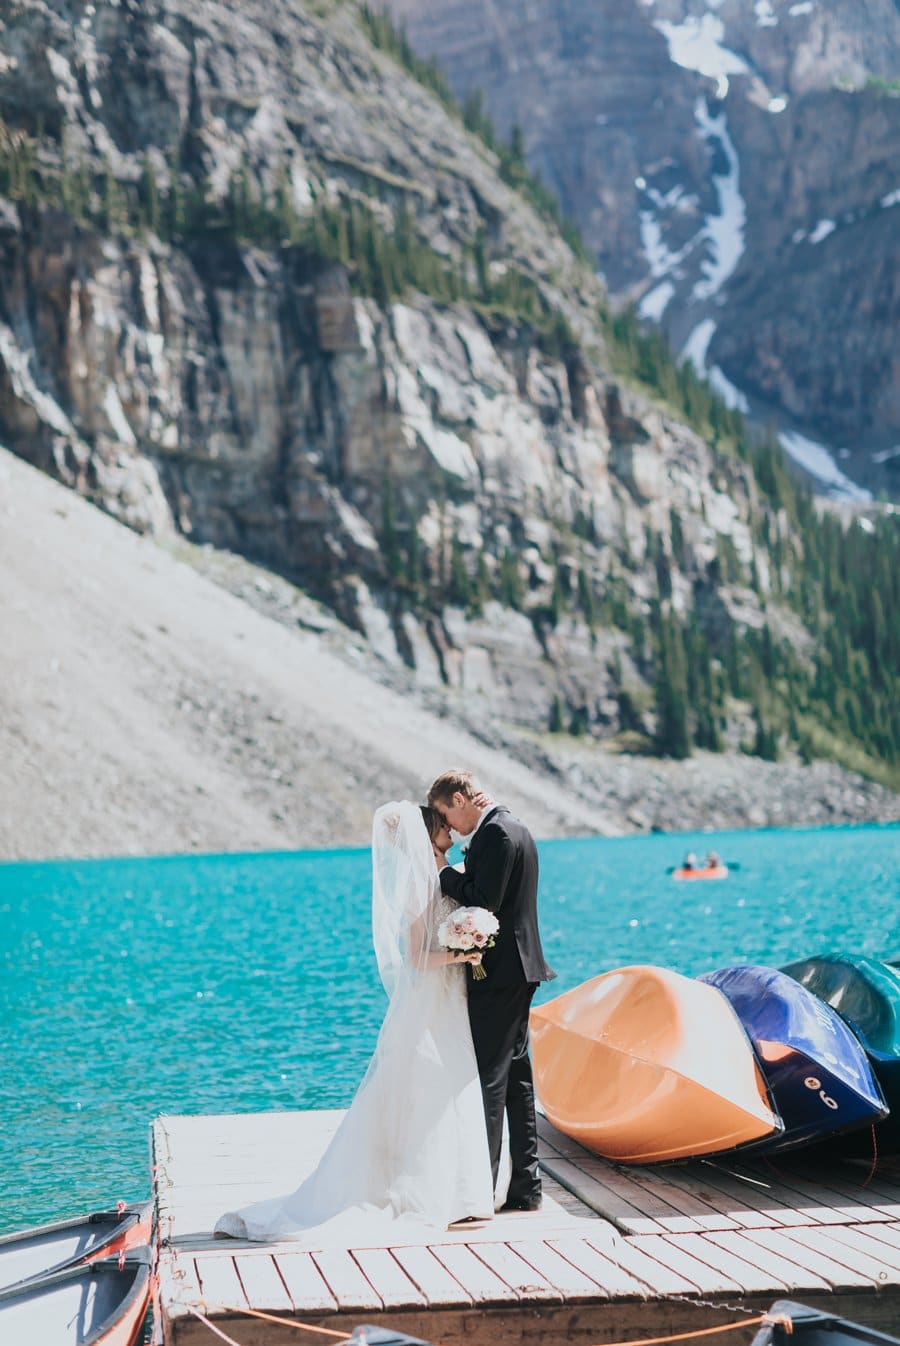 Moraine Lake bride & groom portraits with turquoise blue water, mountains & colorful canoes